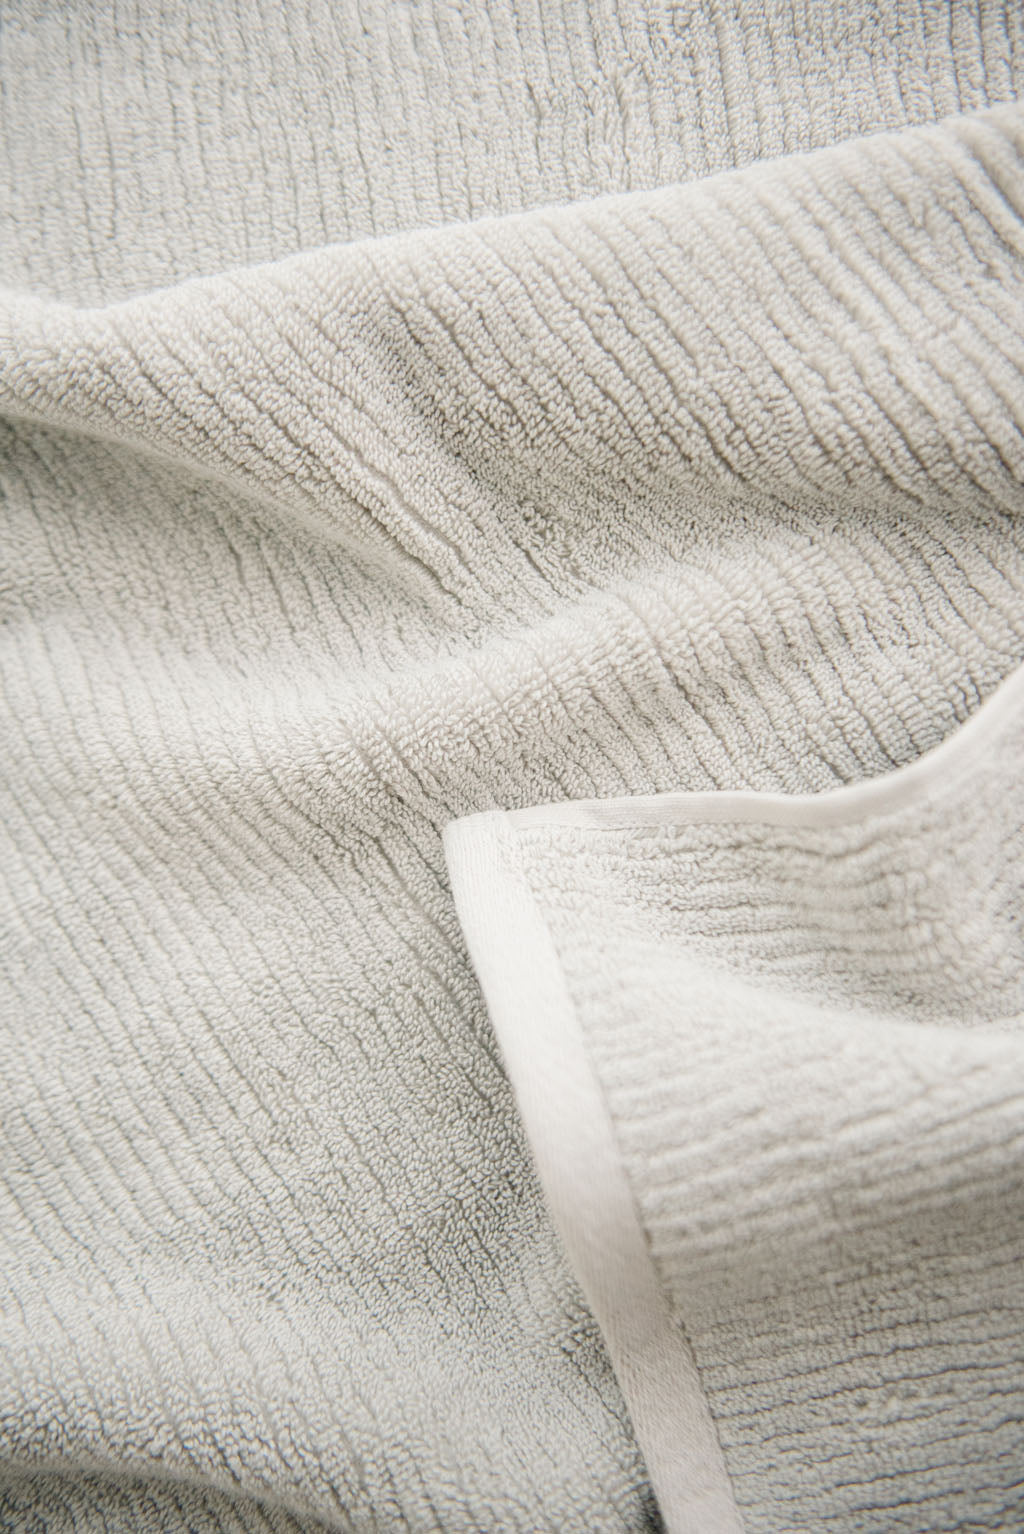 Ribbed Terry Hand Towels in the color Light Grey. Photo of product taken as a close up. 